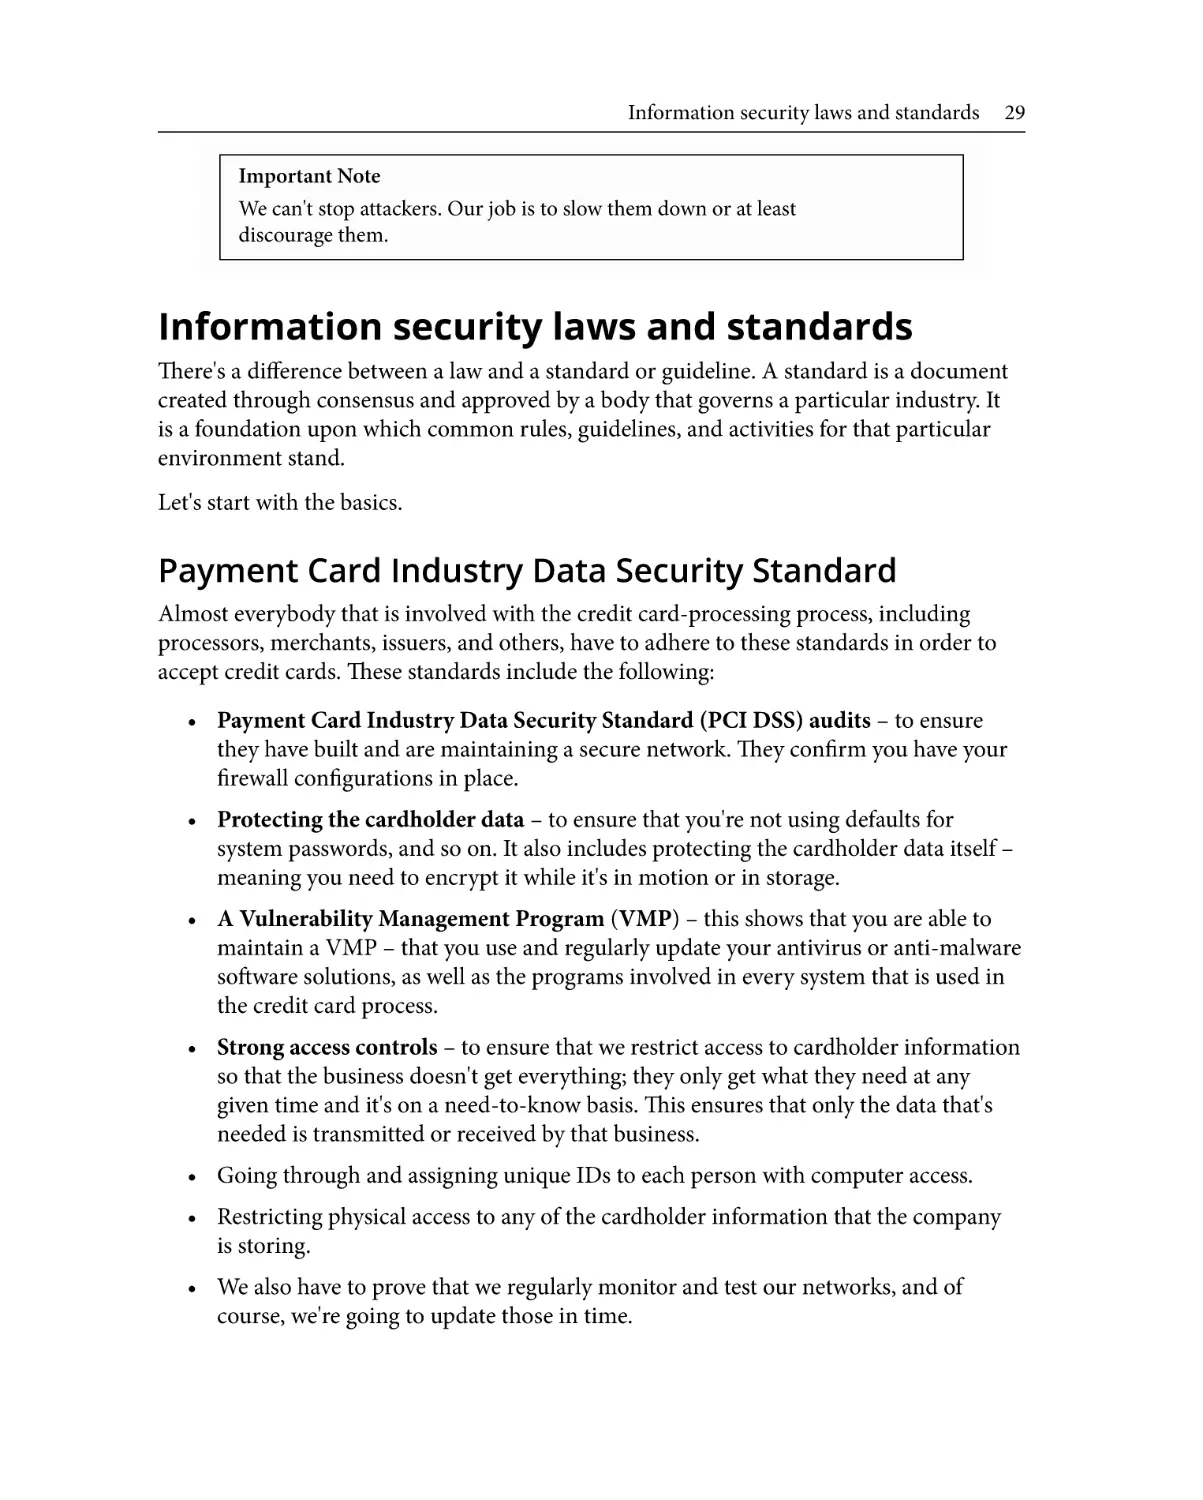 Information security laws and standards
Payment Card Industry Data Security Standard